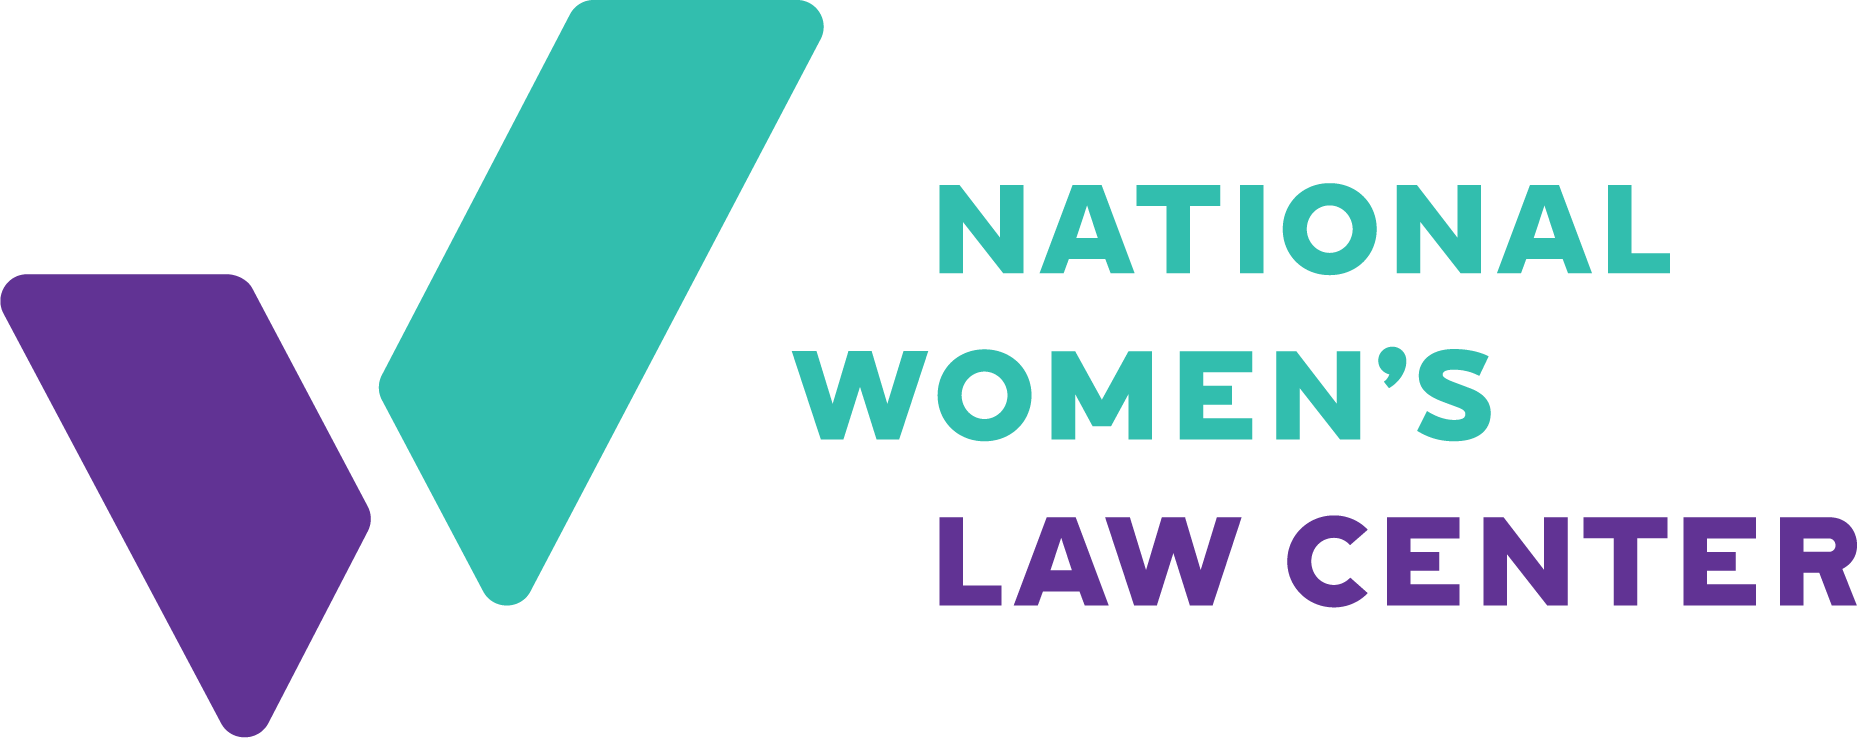 National Women's Law Center.png